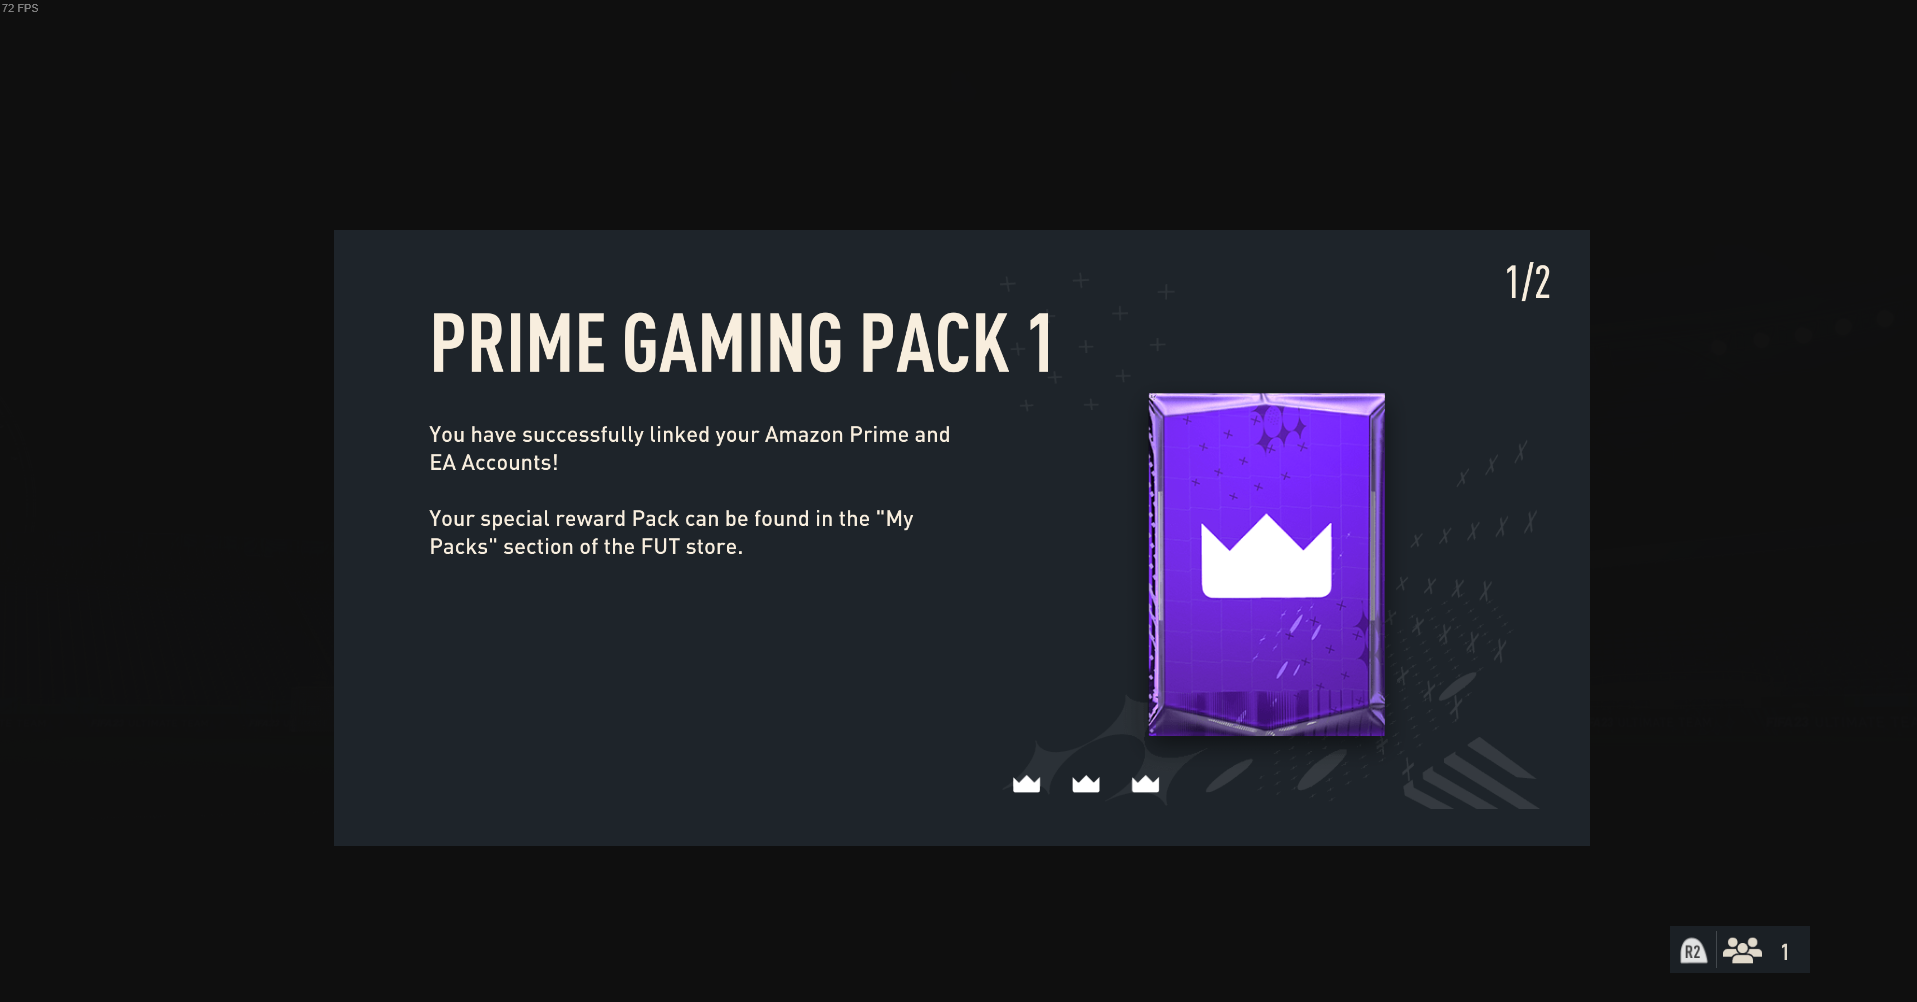 FREE FIFA 23 Prime Gaming Pack for  subscribers (November 2022)